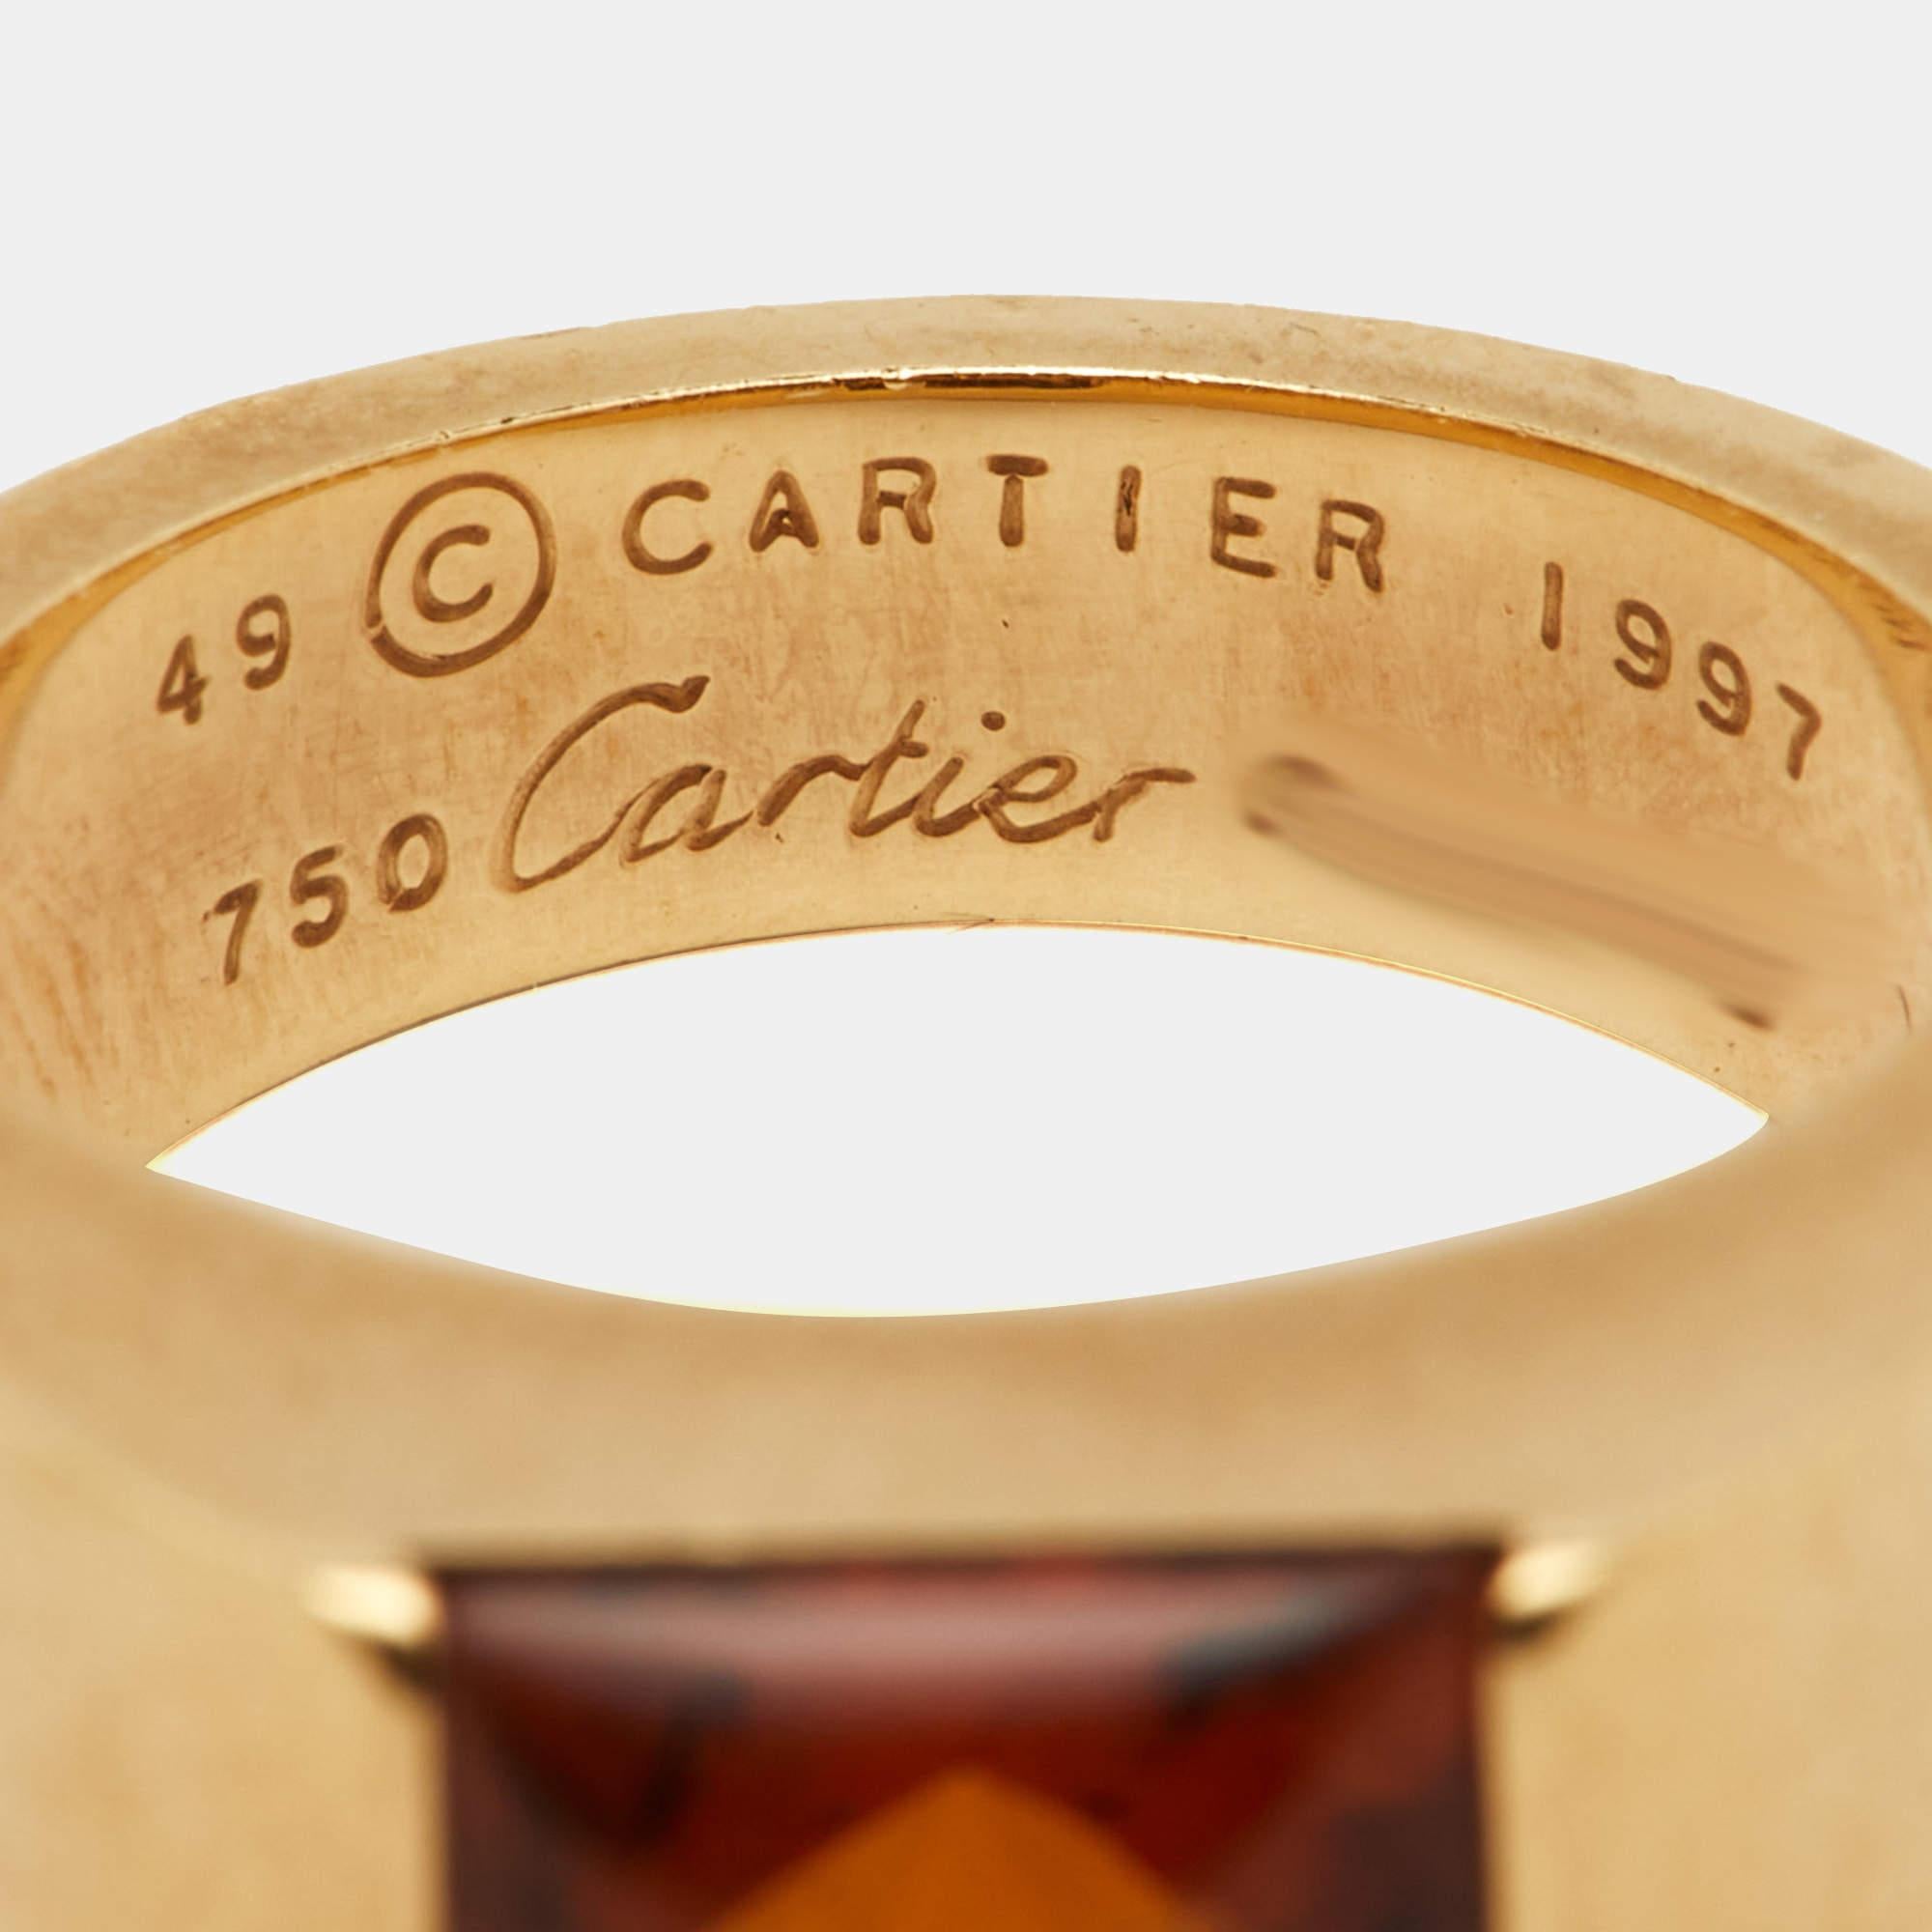 The Cartier Tank Citrine ring is an exquisite jewelry piece. Crafted from luxurious 18k yellow gold, it features a rectangular citrine gemstone with a timeless and elegant tank-inspired design. This ring effortlessly combines classic aesthetics with